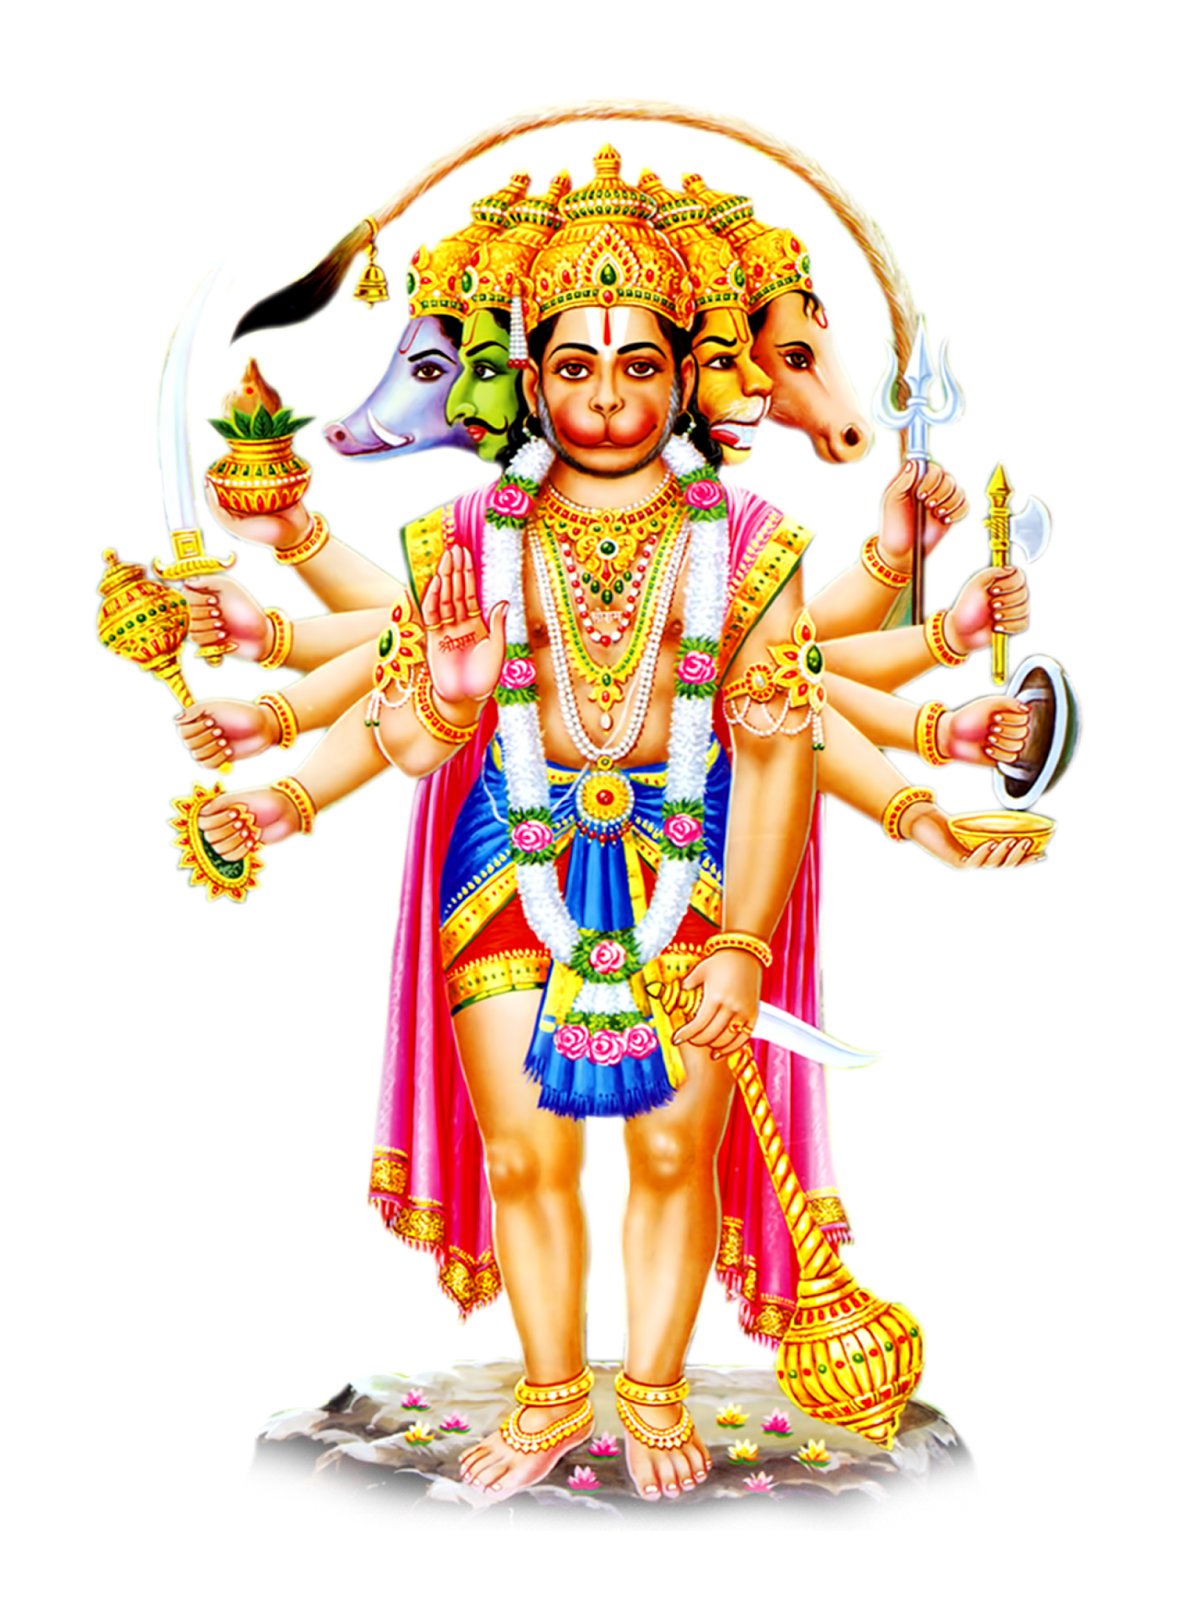 Png File Name: Hanuman Png Hd Dimension: 1177X1600. Image Type: .png. Posted On: Apr 25Th, 2017. Category: Religion Tags: Hanuman, Hinduism - Hanuman, Transparent background PNG HD thumbnail